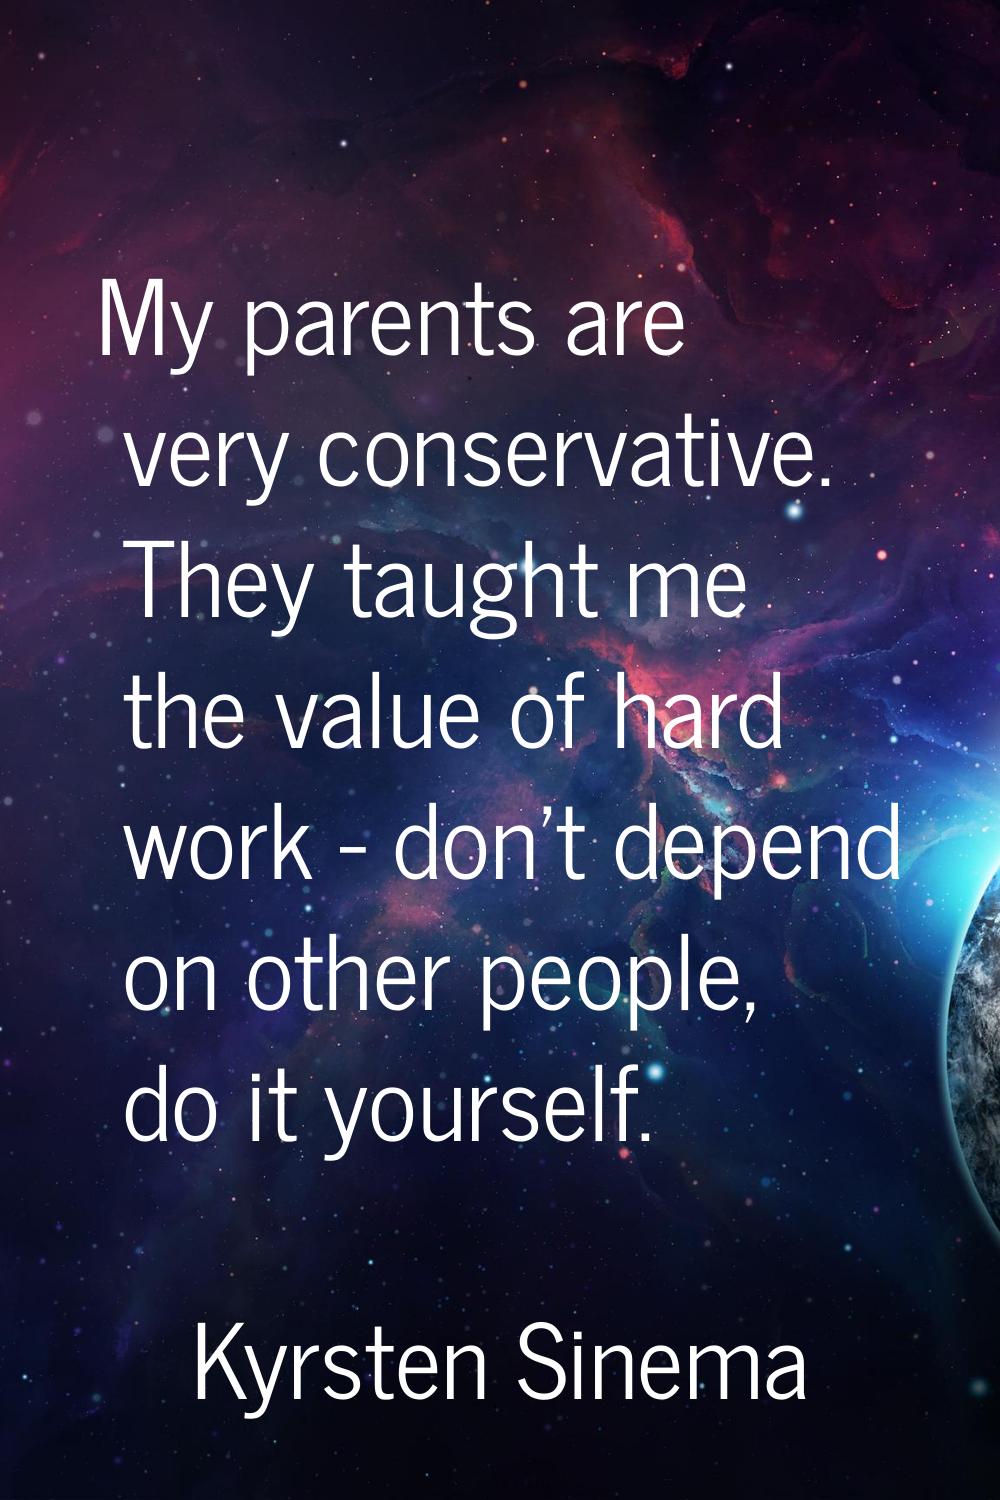 My parents are very conservative. They taught me the value of hard work - don't depend on other peo